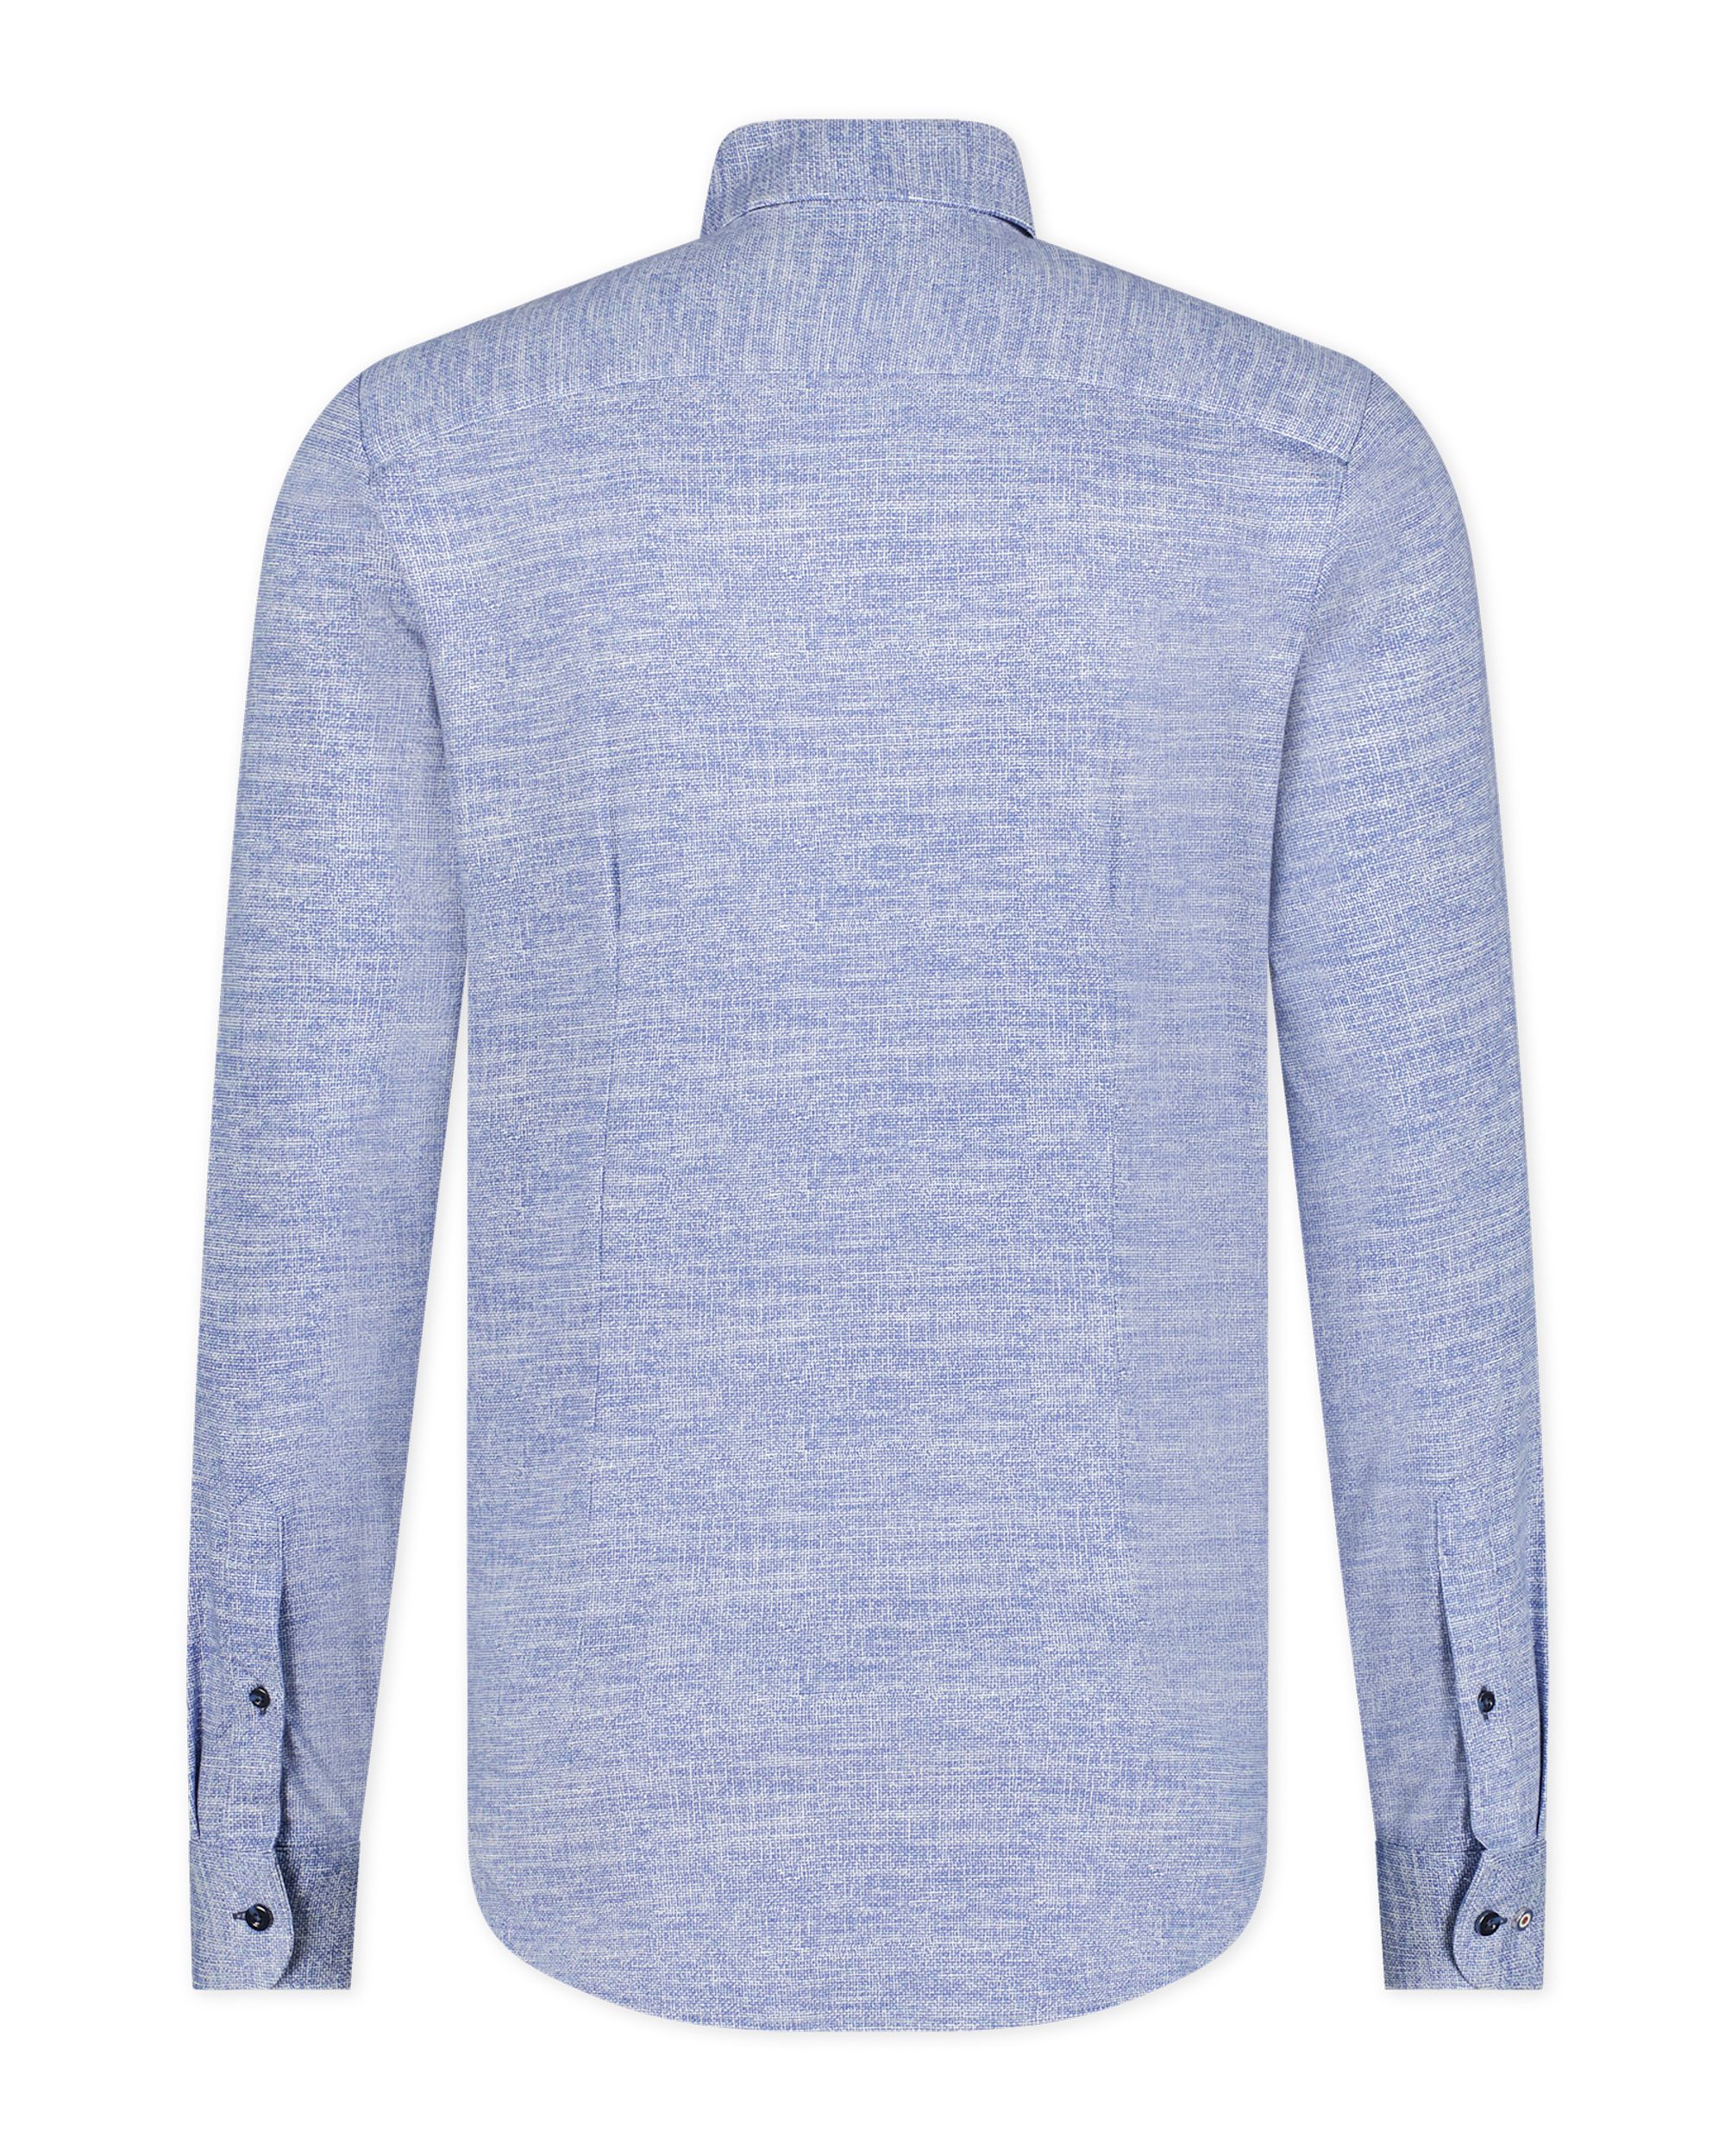 Blue Industry Casual Overhemd LM Blauw 091058-001-37